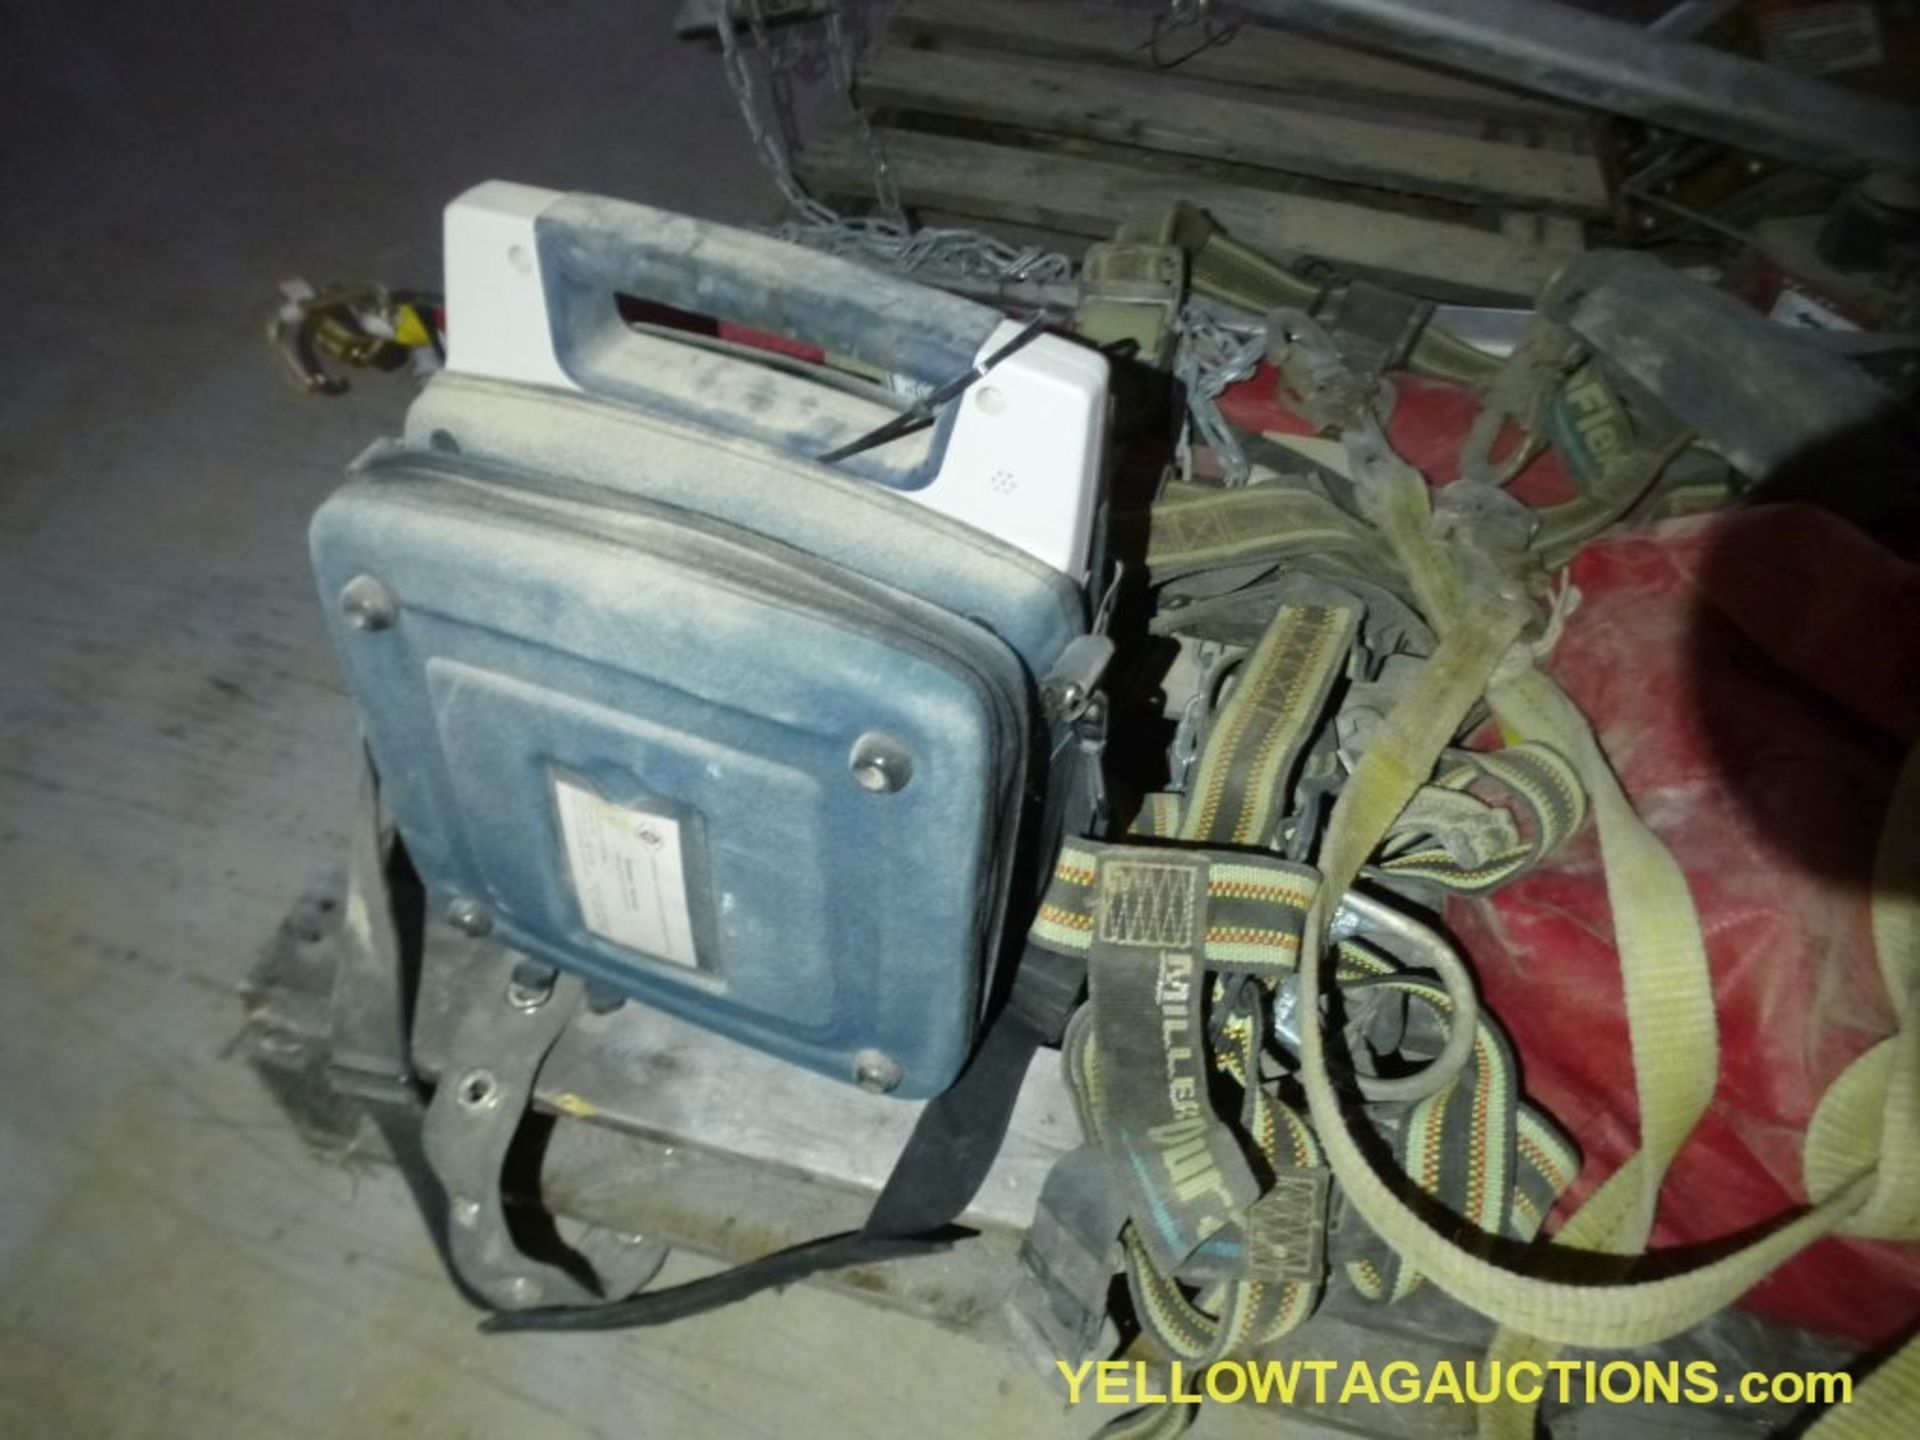 Lot of Assorted Safety Fall Protection - Brands Include: AED, etc. - Image 5 of 8